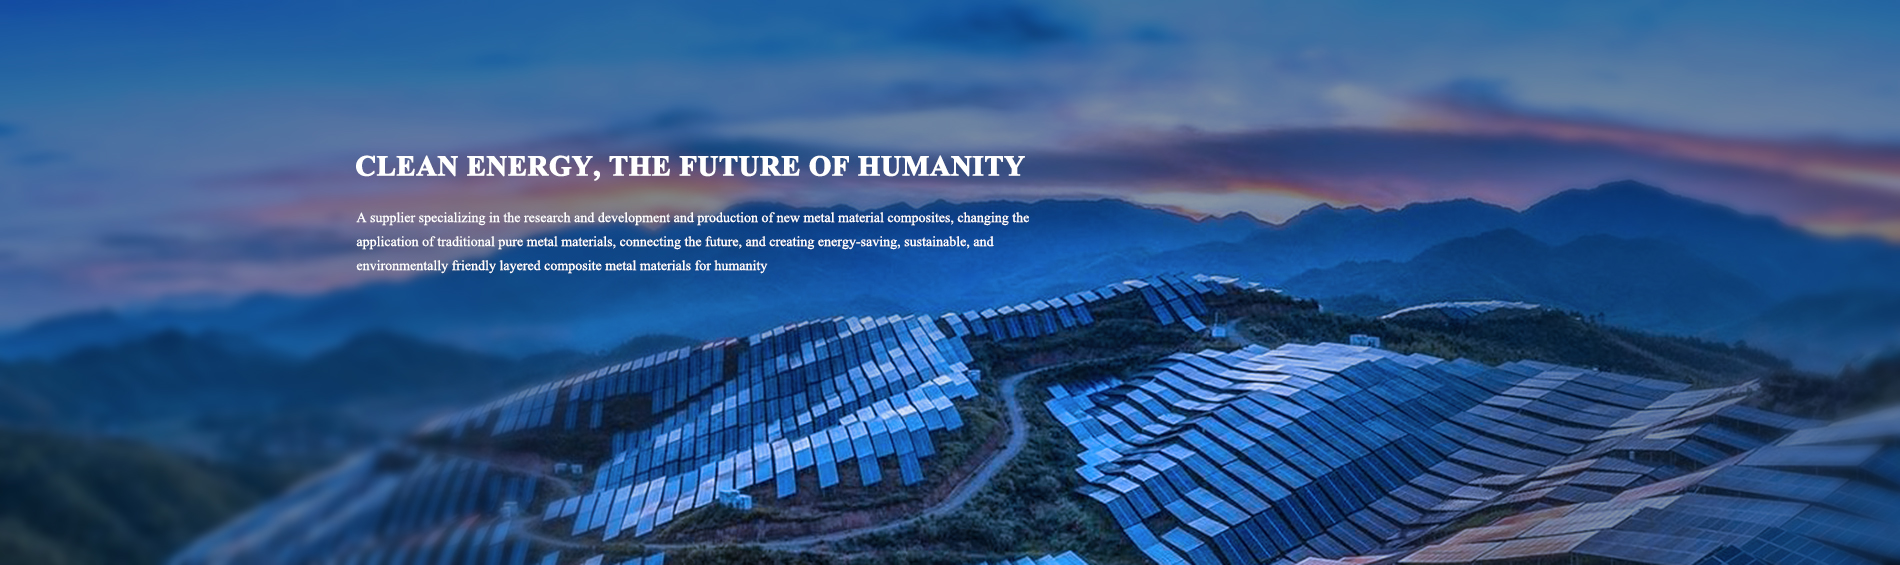 Clean energy, the future of humanity